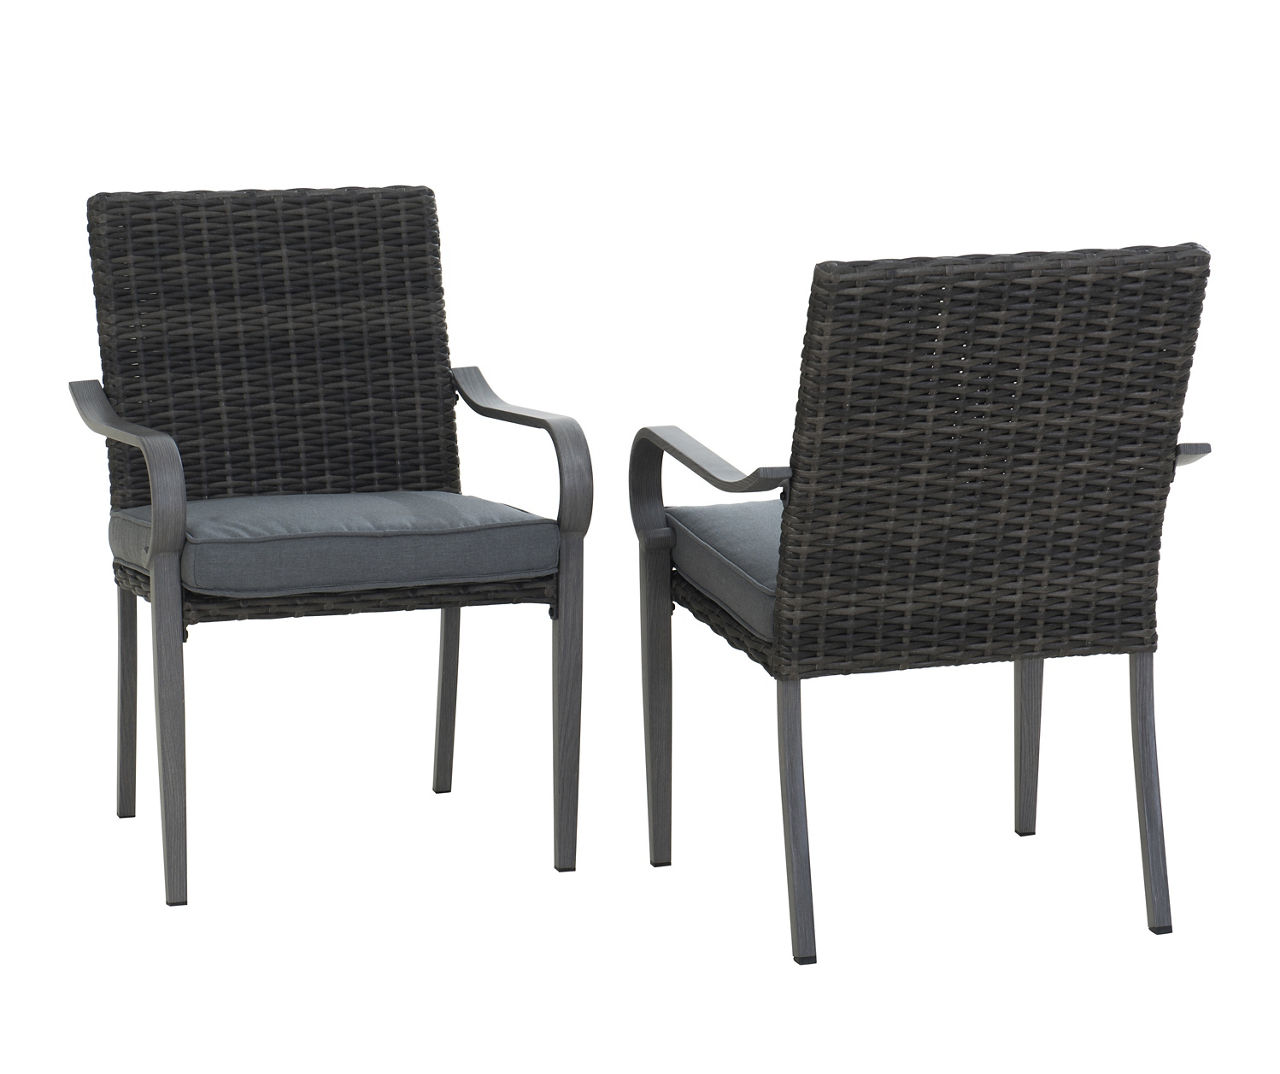 Broyhill Broyhill 4-Piece Outdoor Dining Chair Cushion Set